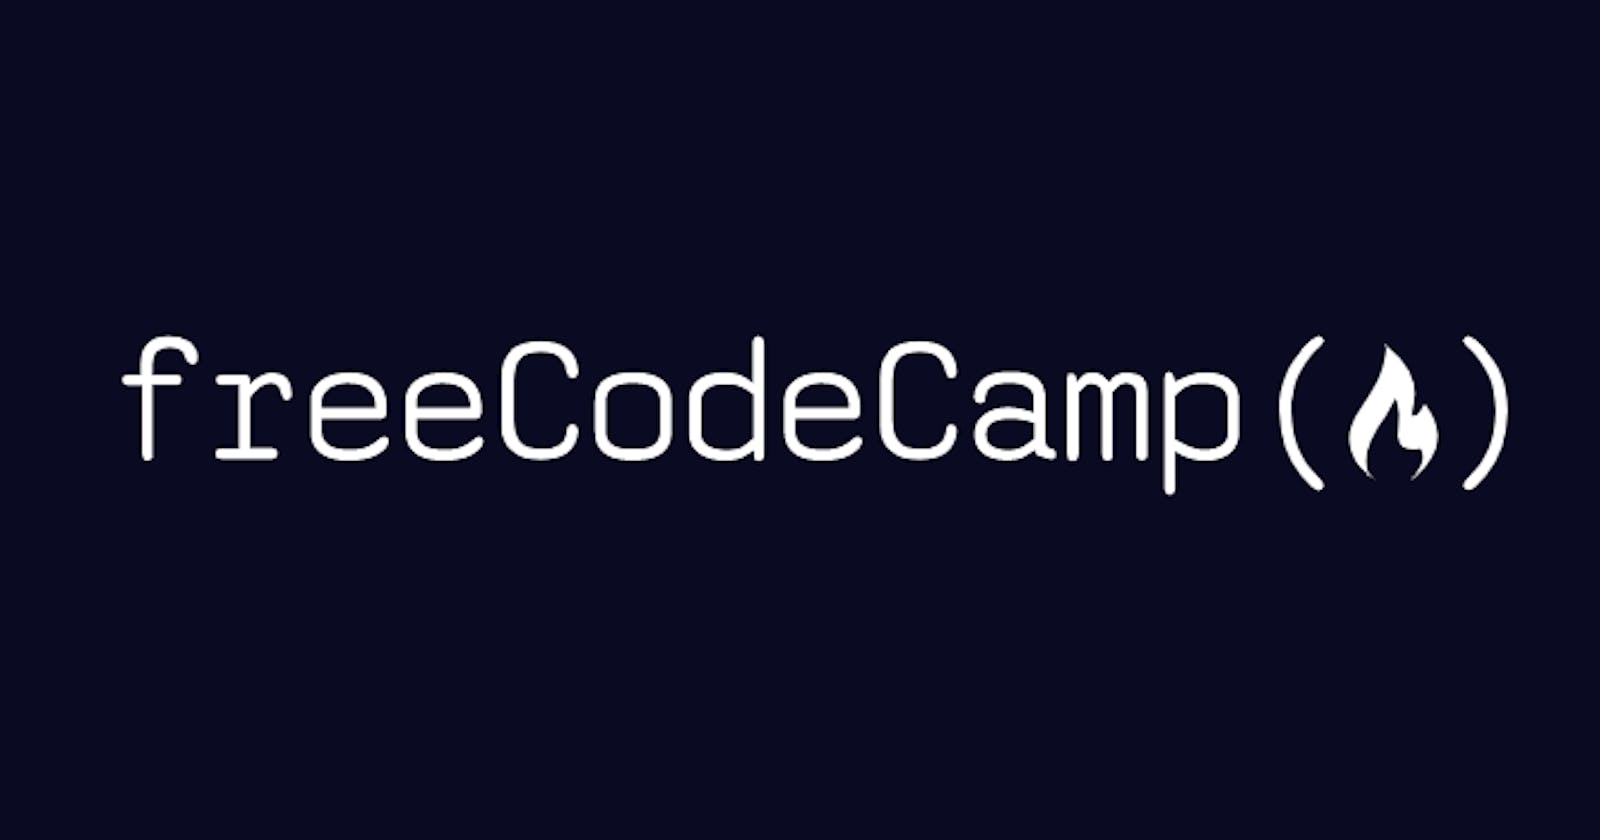 My Journey With freeCodeCamp